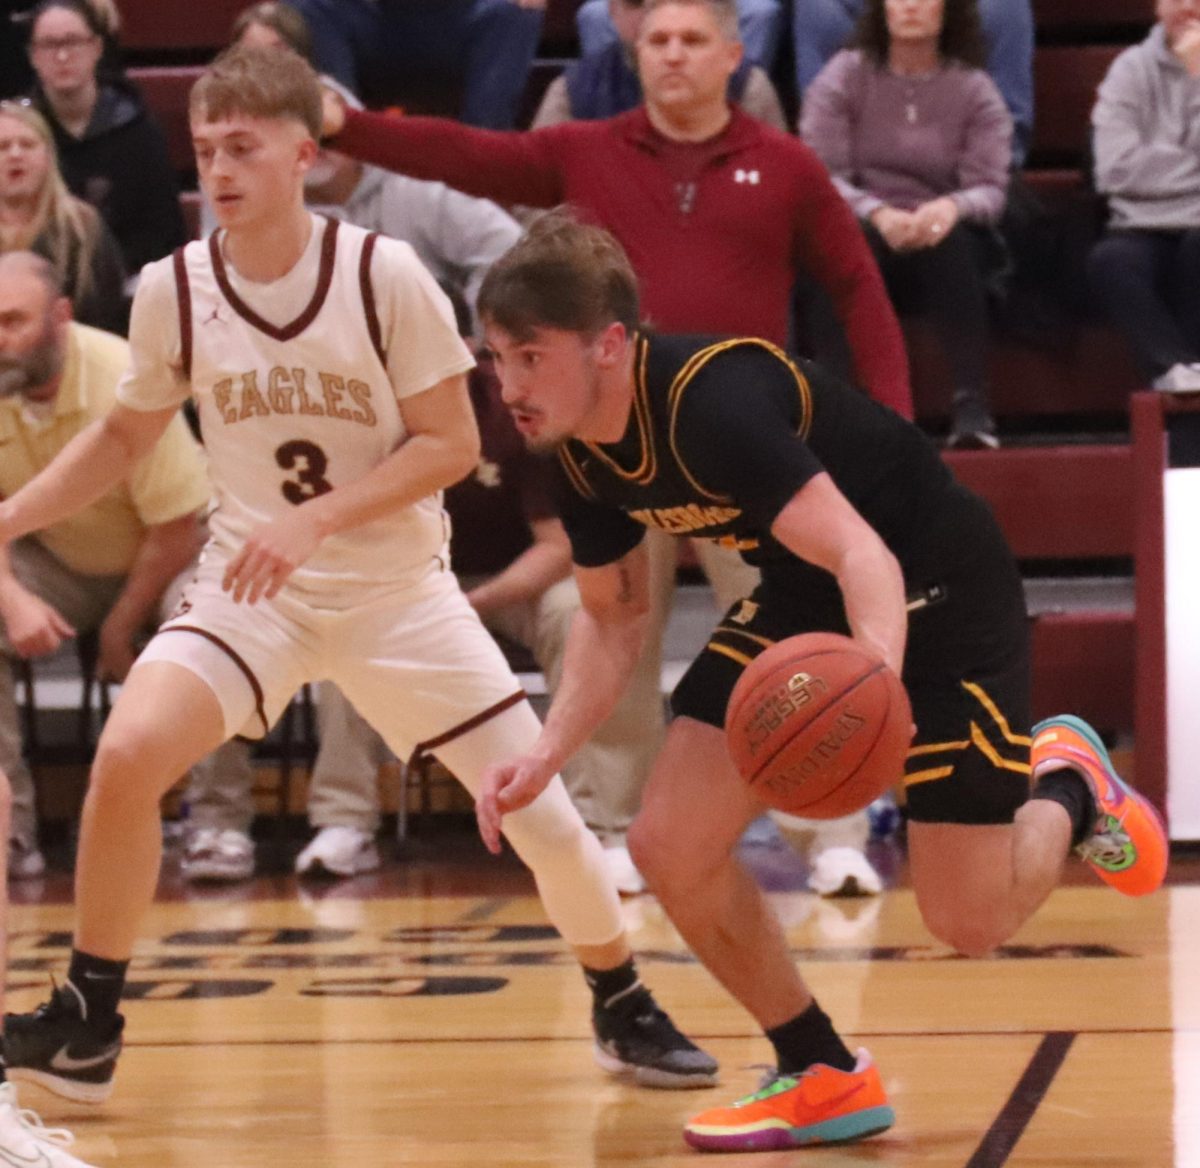 Middlesboro guard Cayden Grigsby scored a team-high 16 points in the Jackets 50-46 loss at Leslie County on Friday.